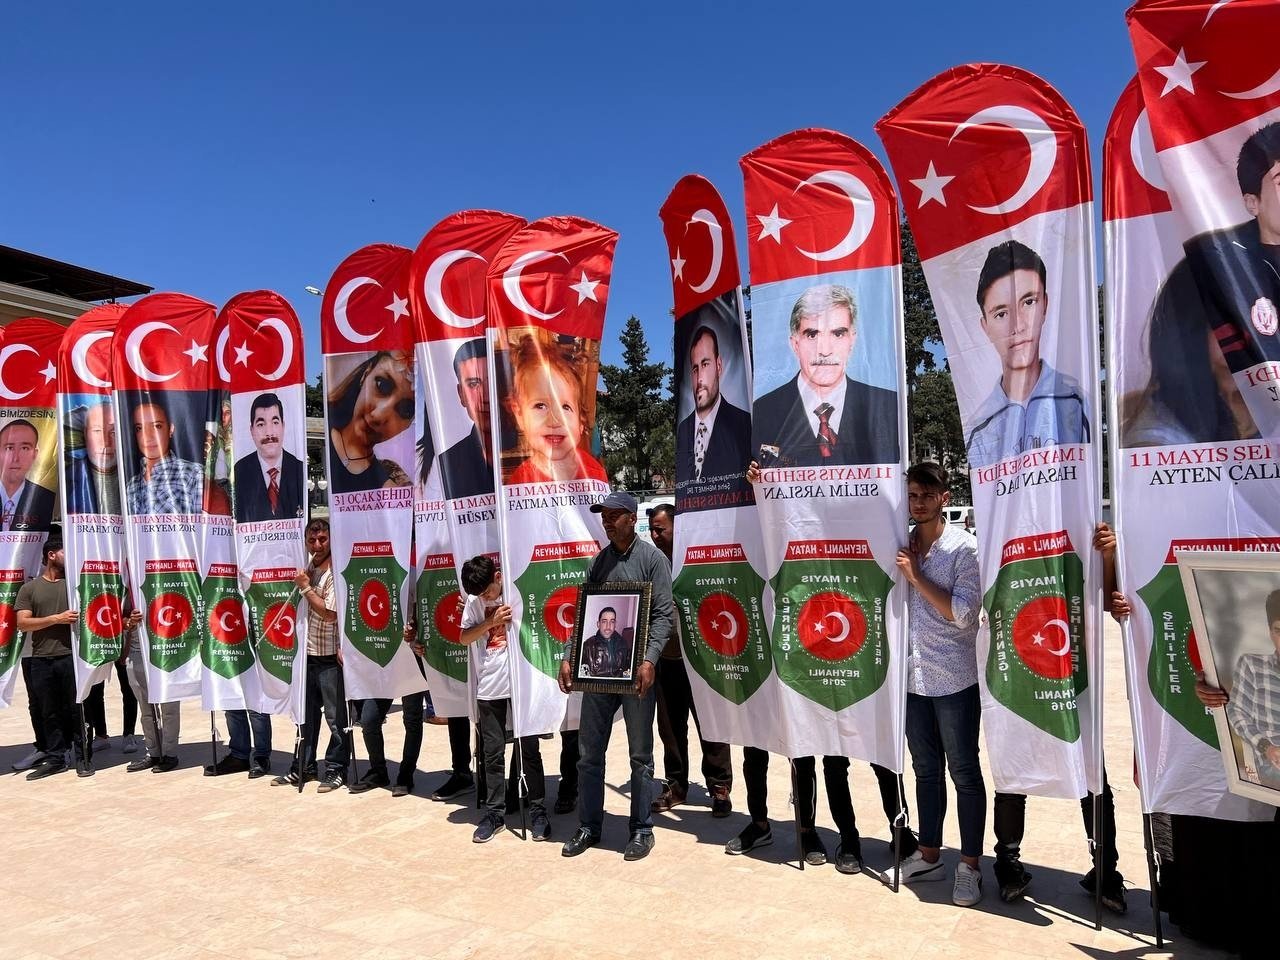 People hold pictures of victims during the remembrance events, in Reyhanlı, in Hatay, southern Turkey, May 11, 2022. (İHA PHOTO)